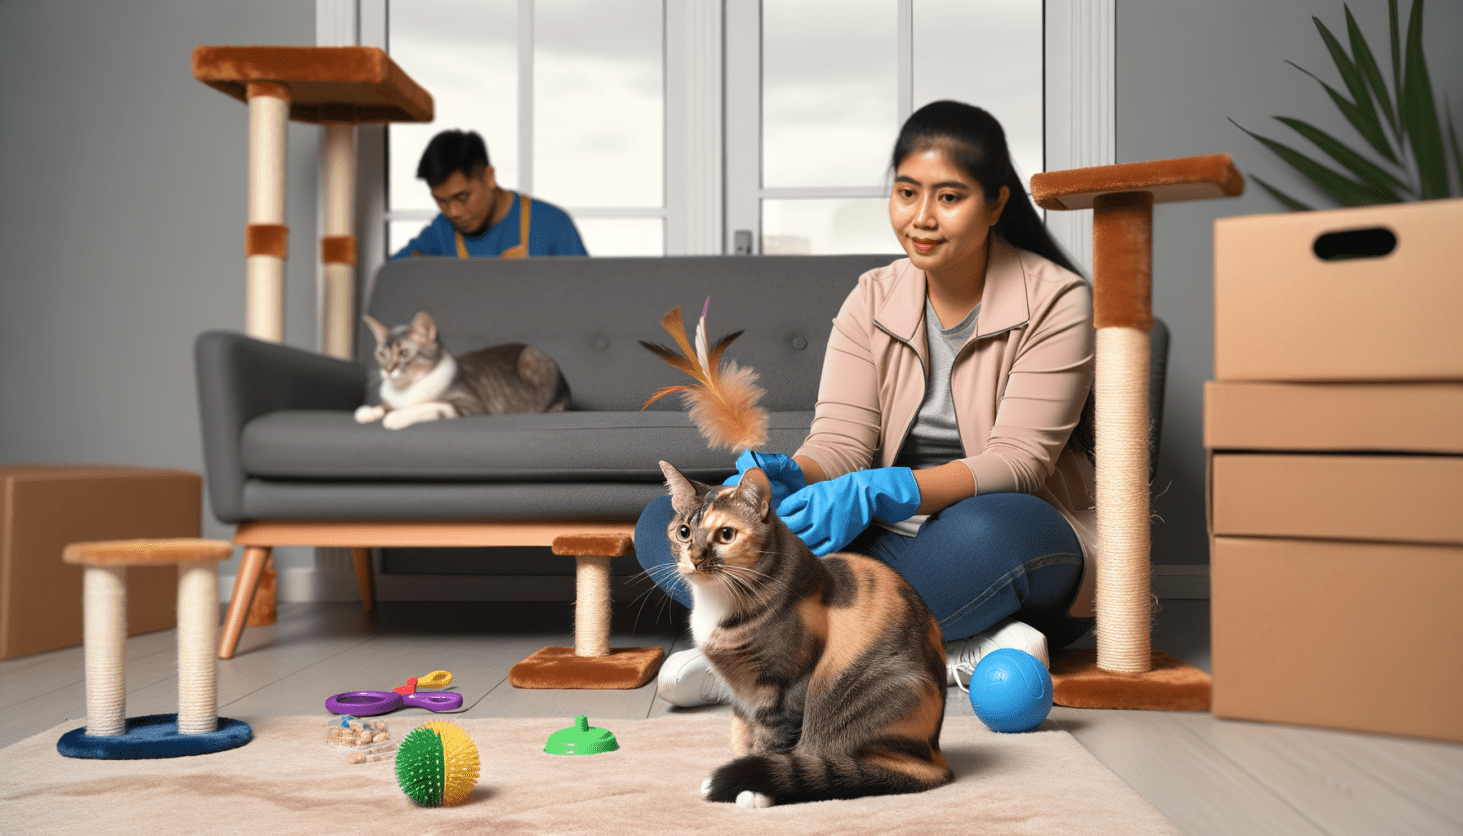 A visually engaging image depicting effective and positive cat training techniques without displaying words. ultra realistic style, cinematic.